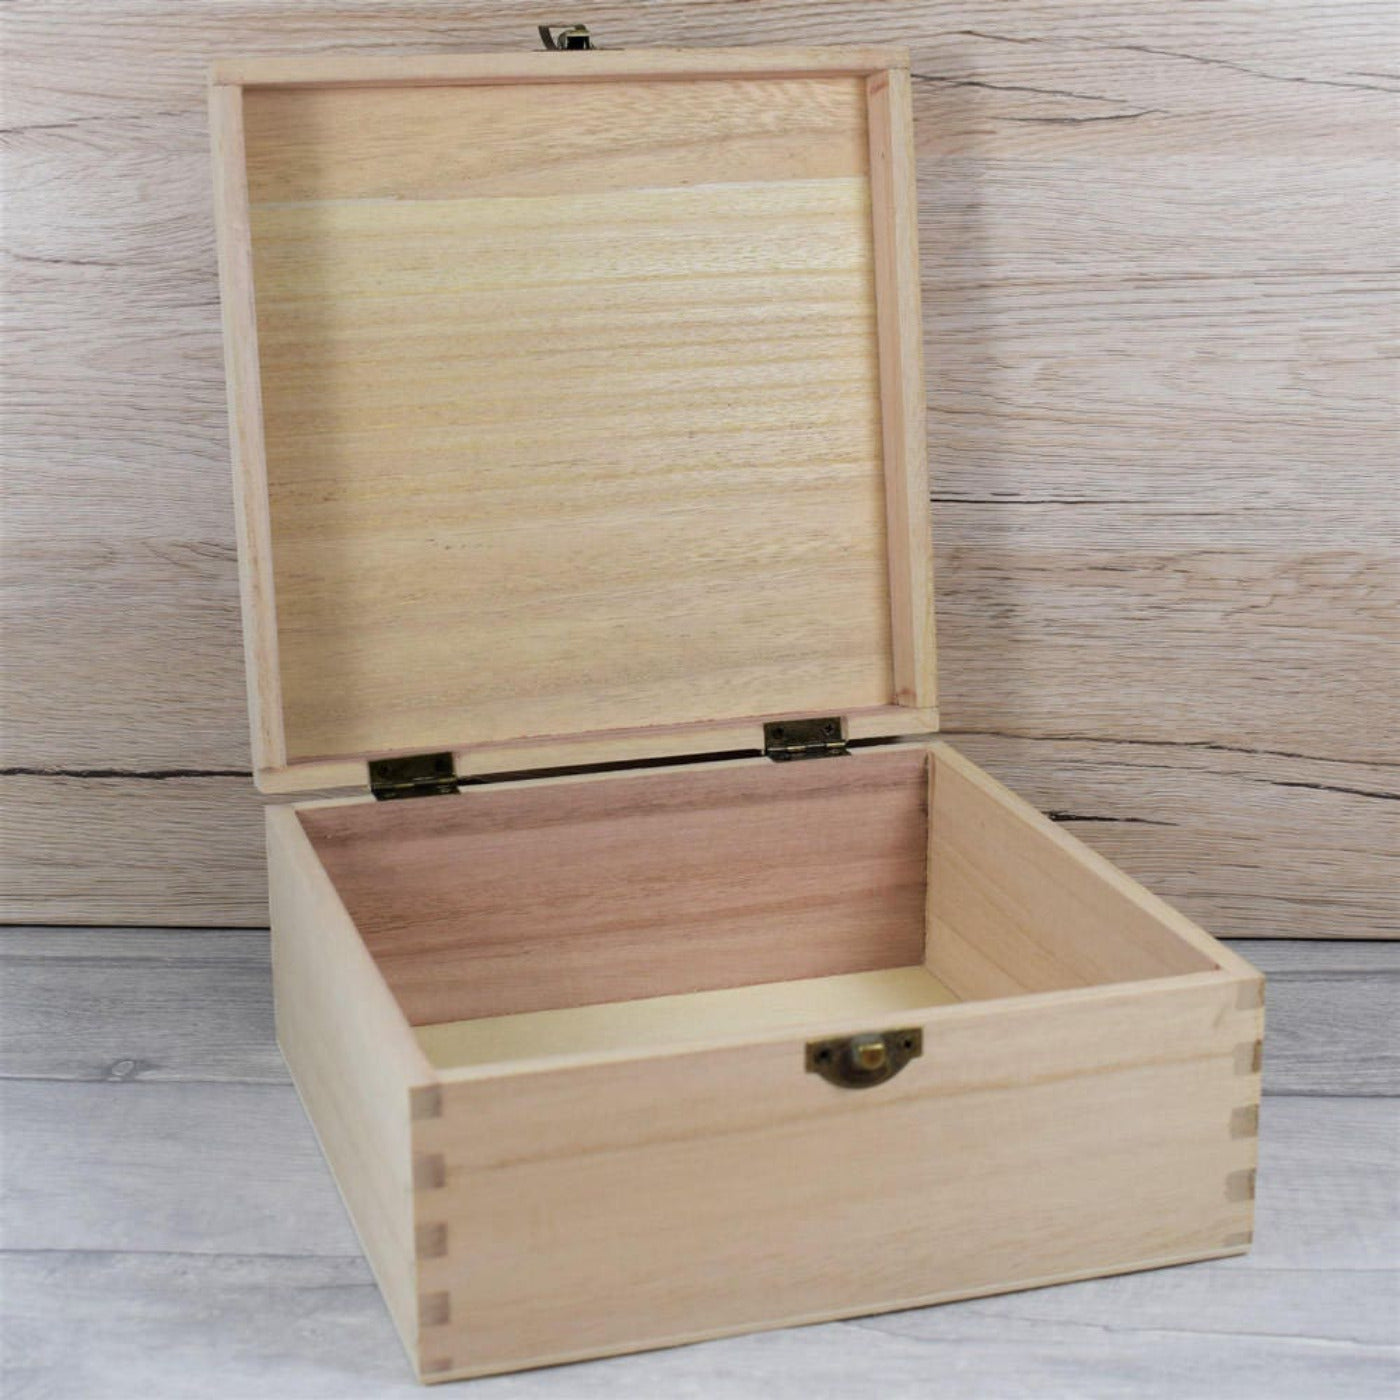 Personalised, Engraved Wooden Keepsake Box - Couples Initials with Heart